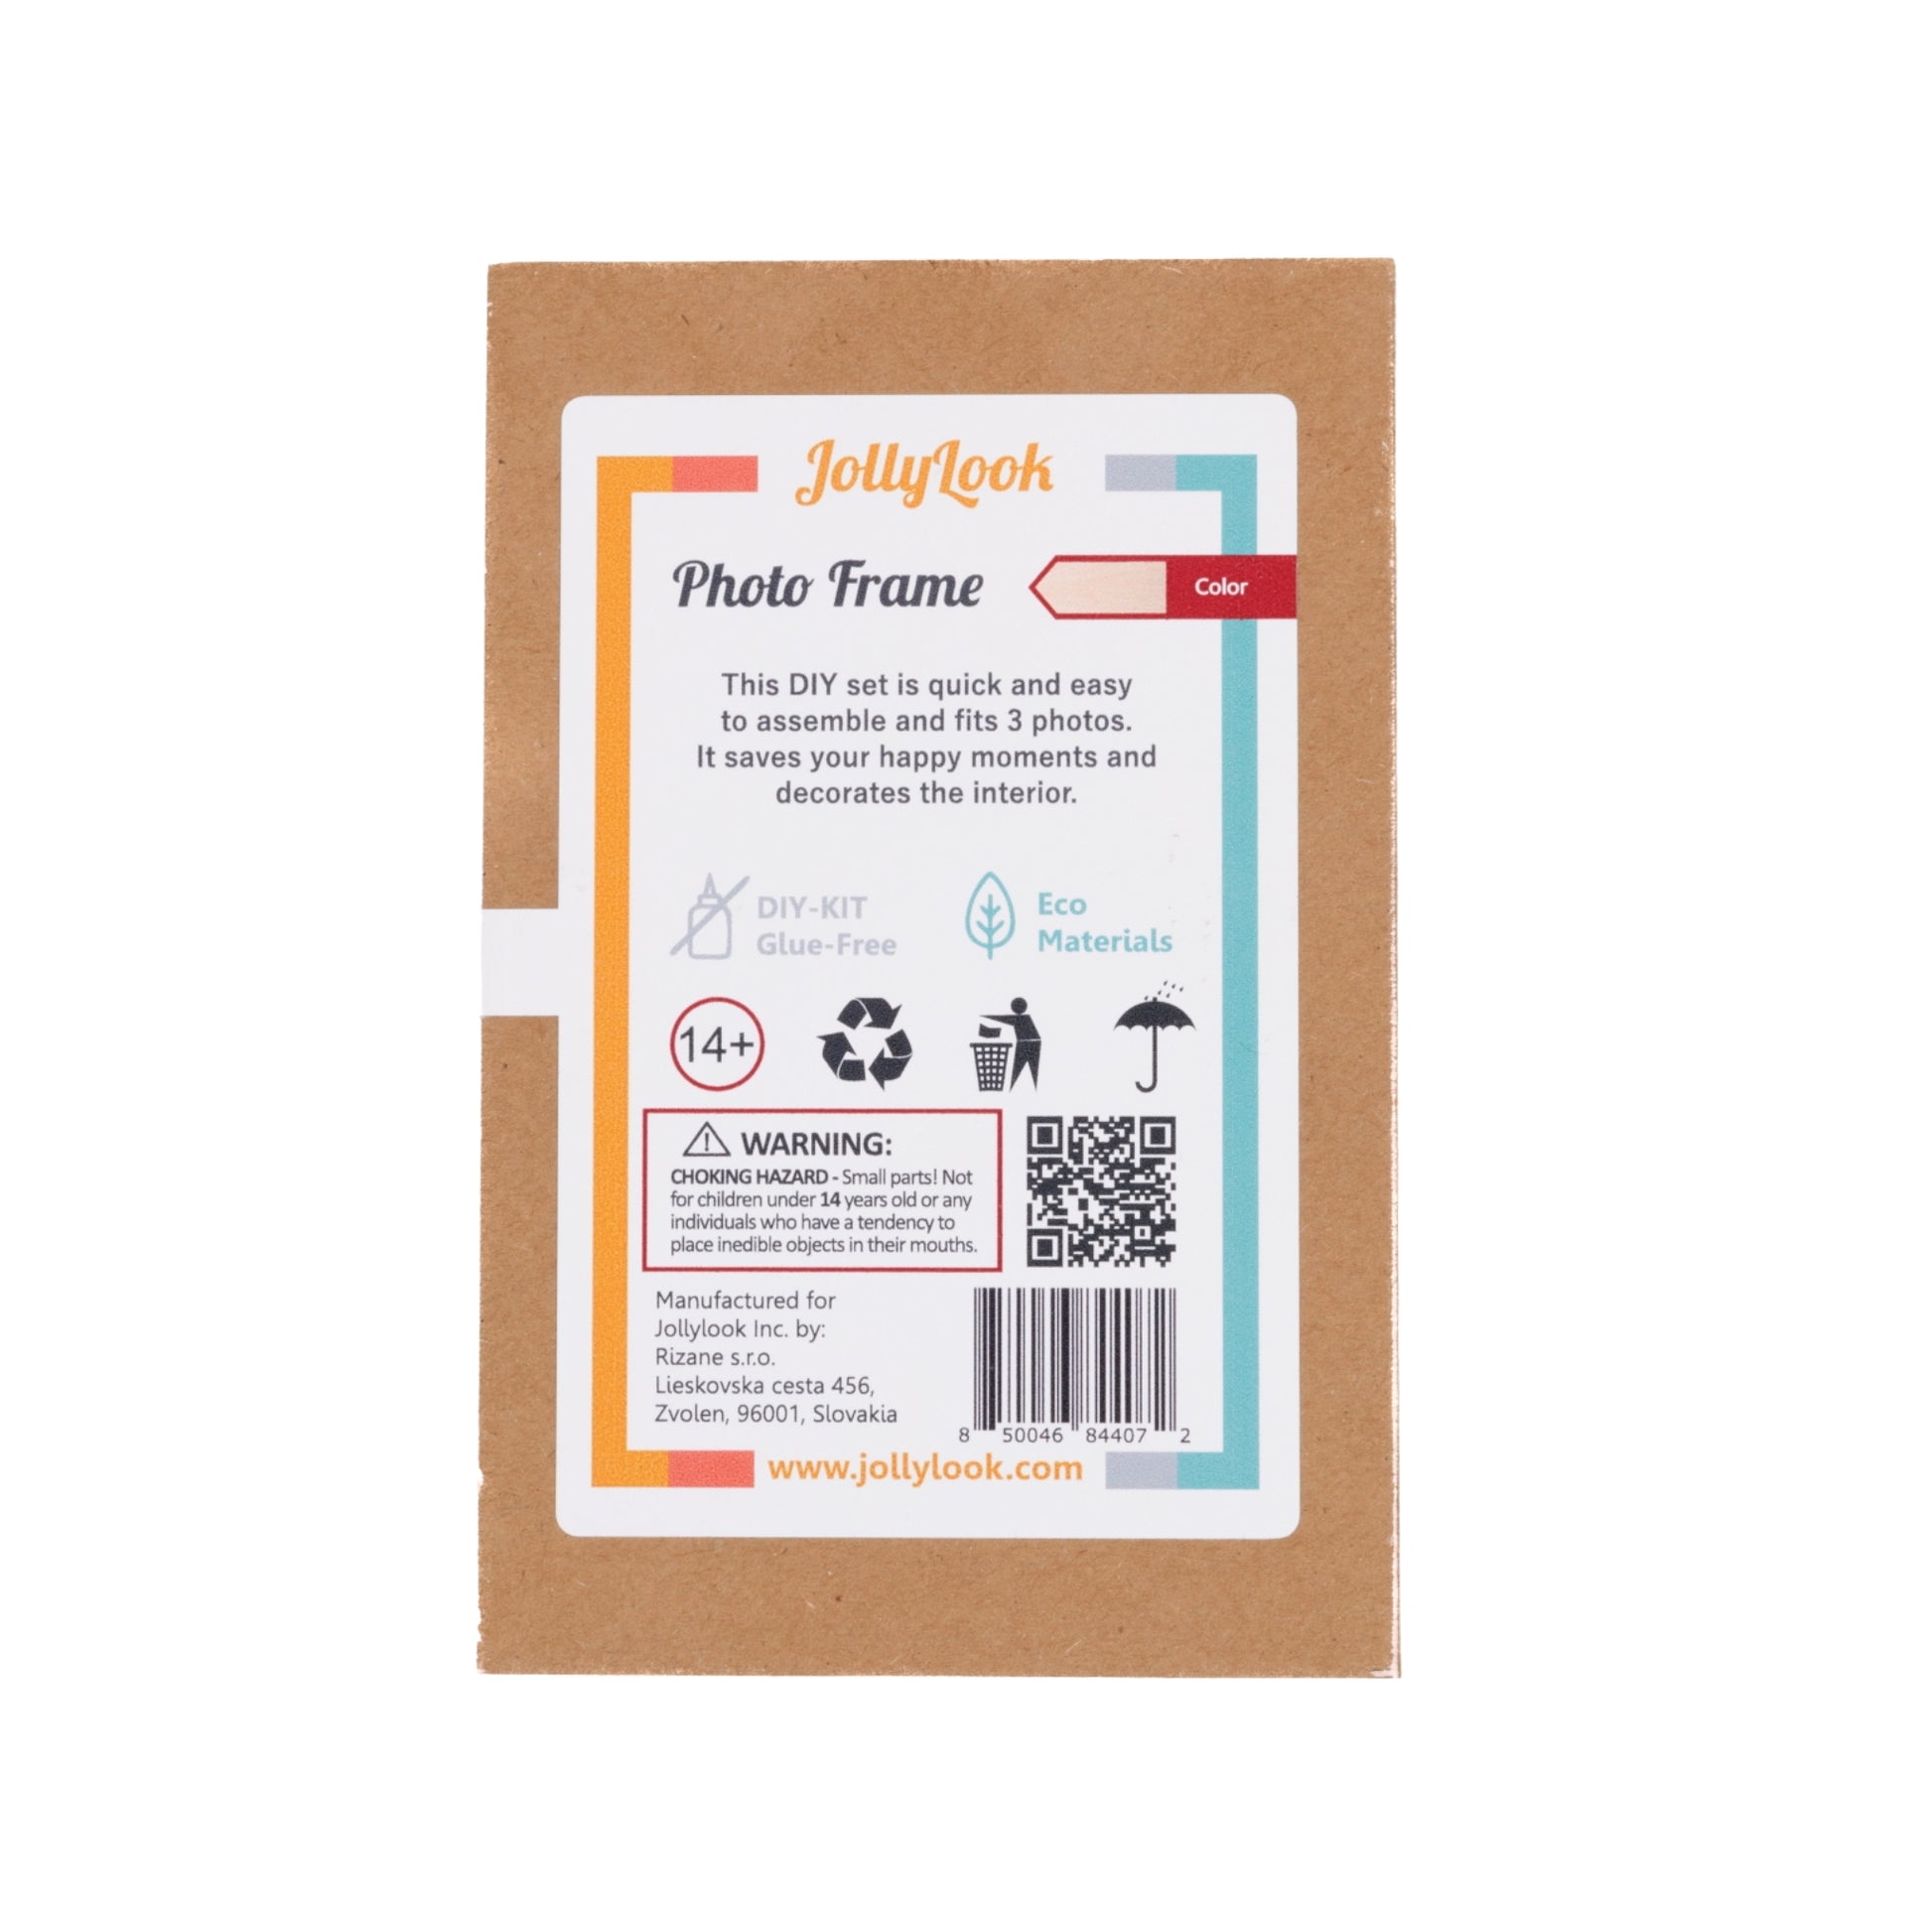 A packed set of three Natural plywood interconnectable Instax Mini film photo frames for instant Mini photos.